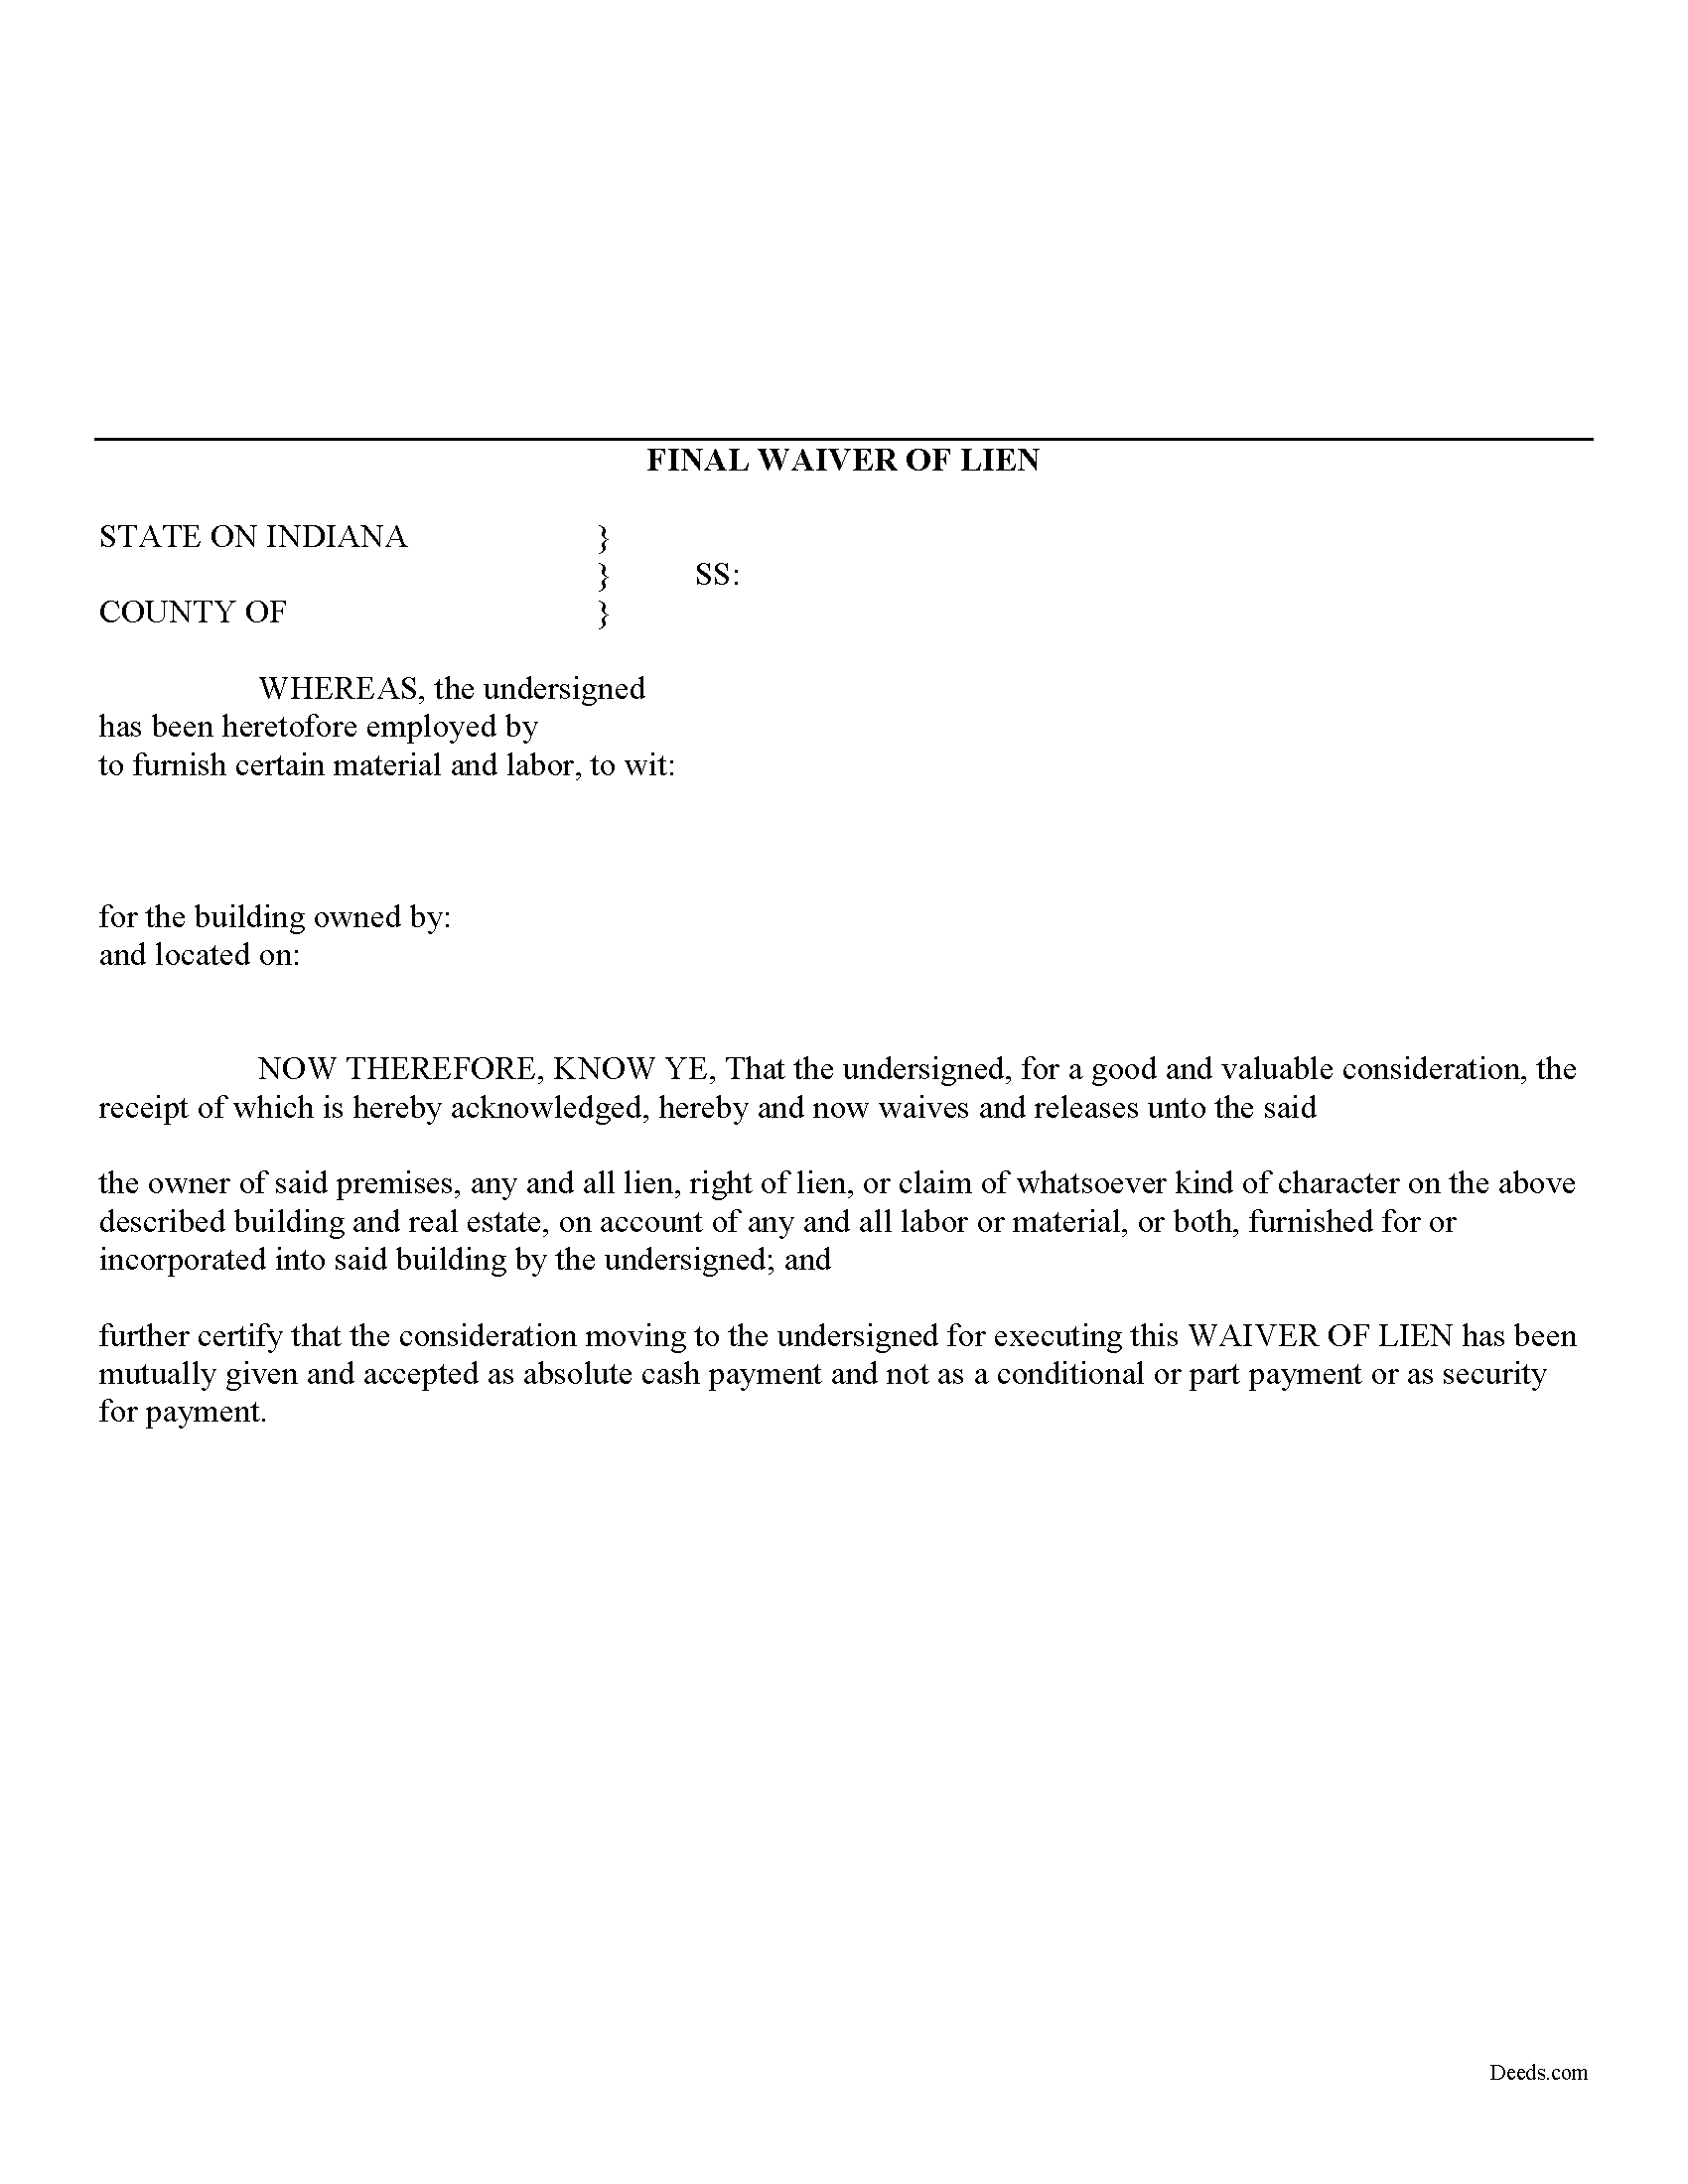 Indiana Final Lien Waiver Image